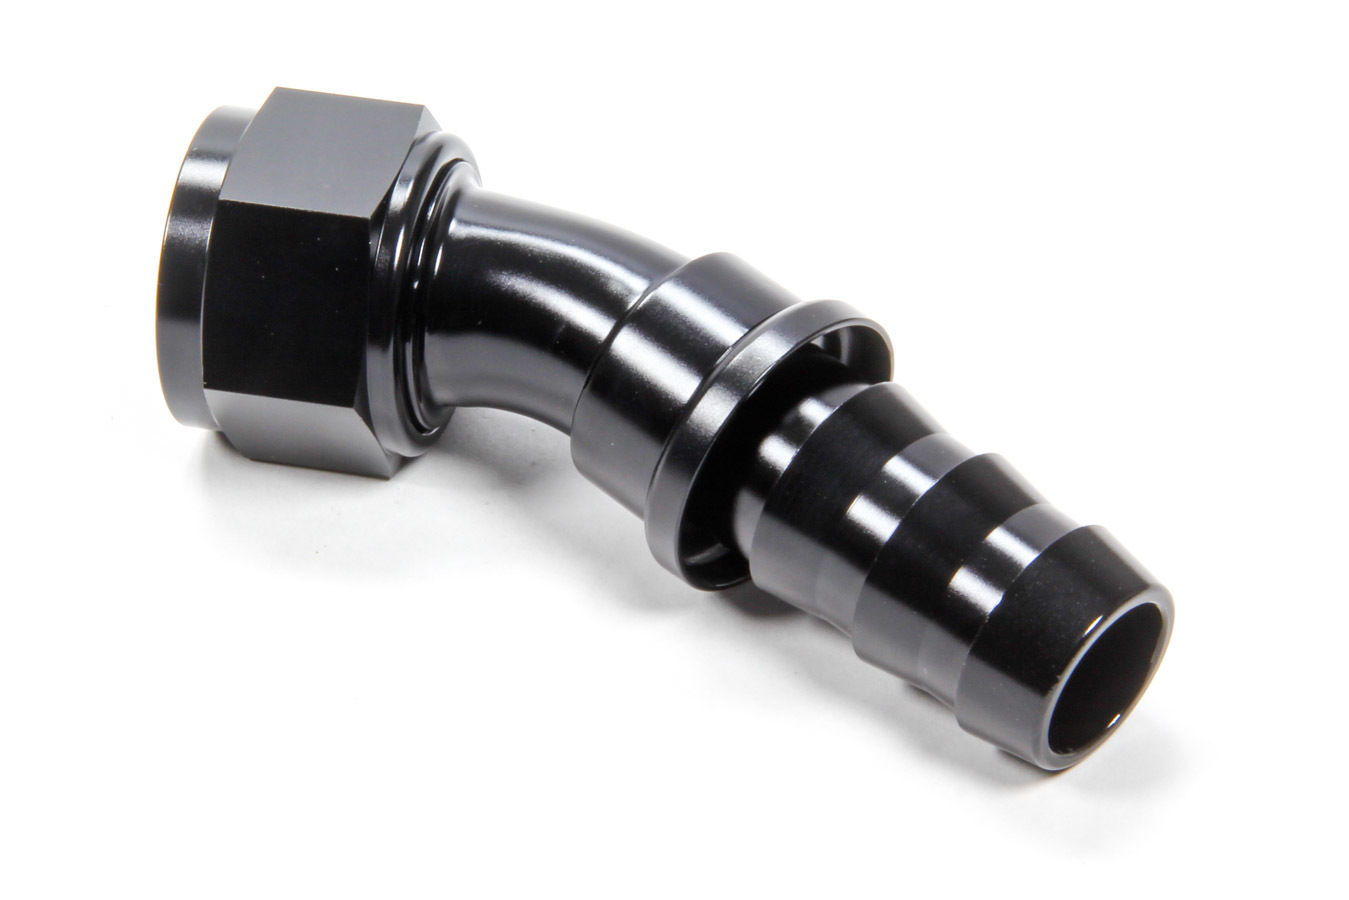 Triple X Race Components HF-13016-BLK Fitting, Hose End, 30 Degree, 16 AN Hose Barb to 16 AN Female, Aluminum, Black Anodized, Each